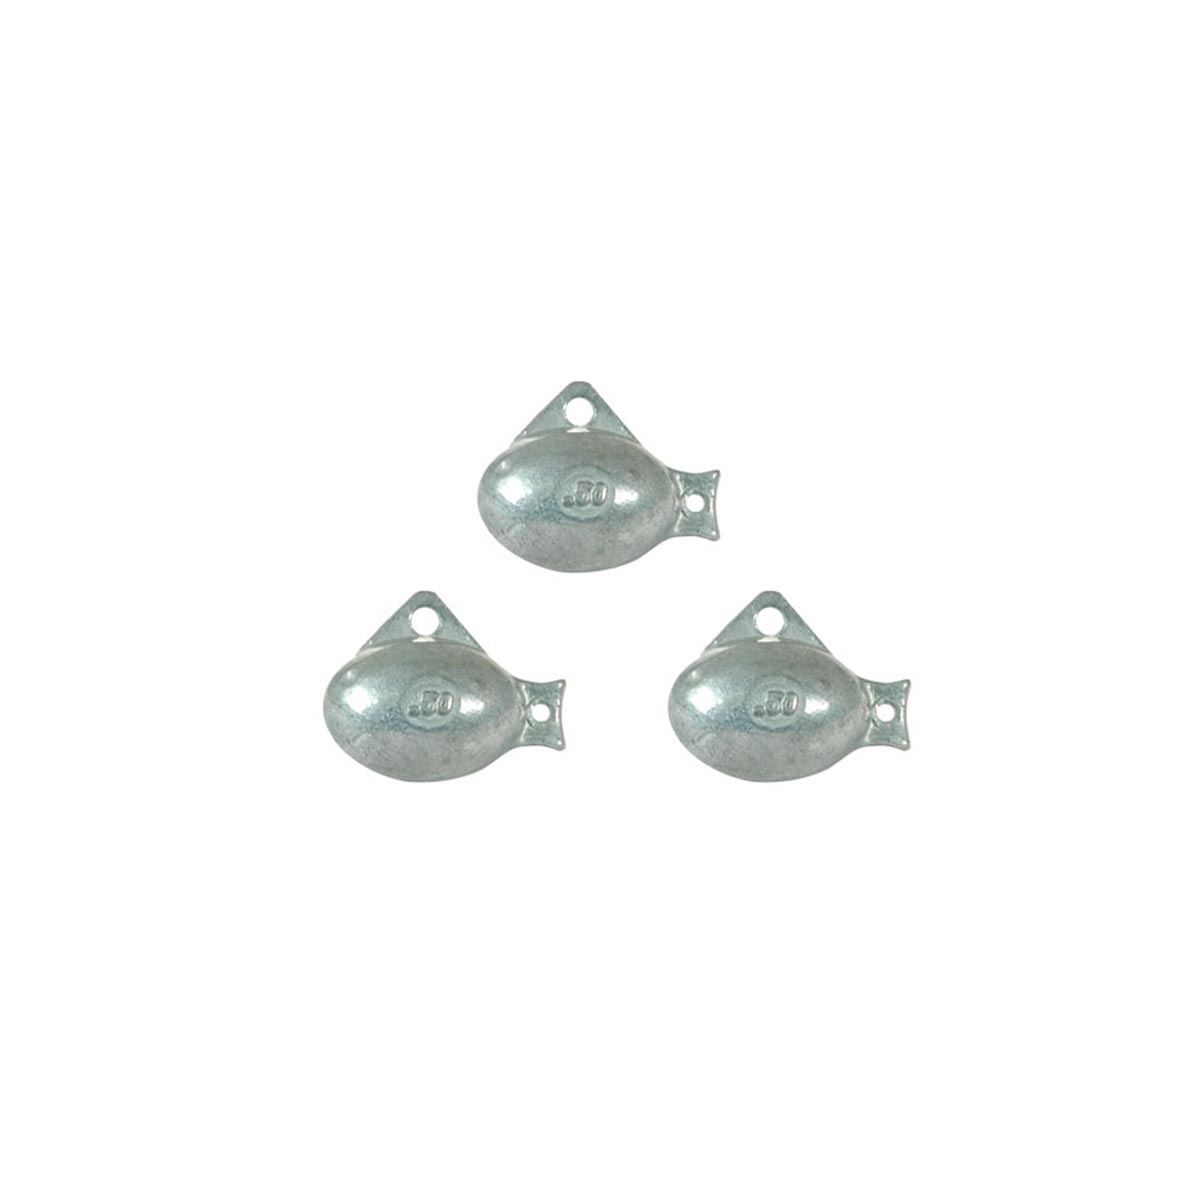 Replacement Guppy Weights